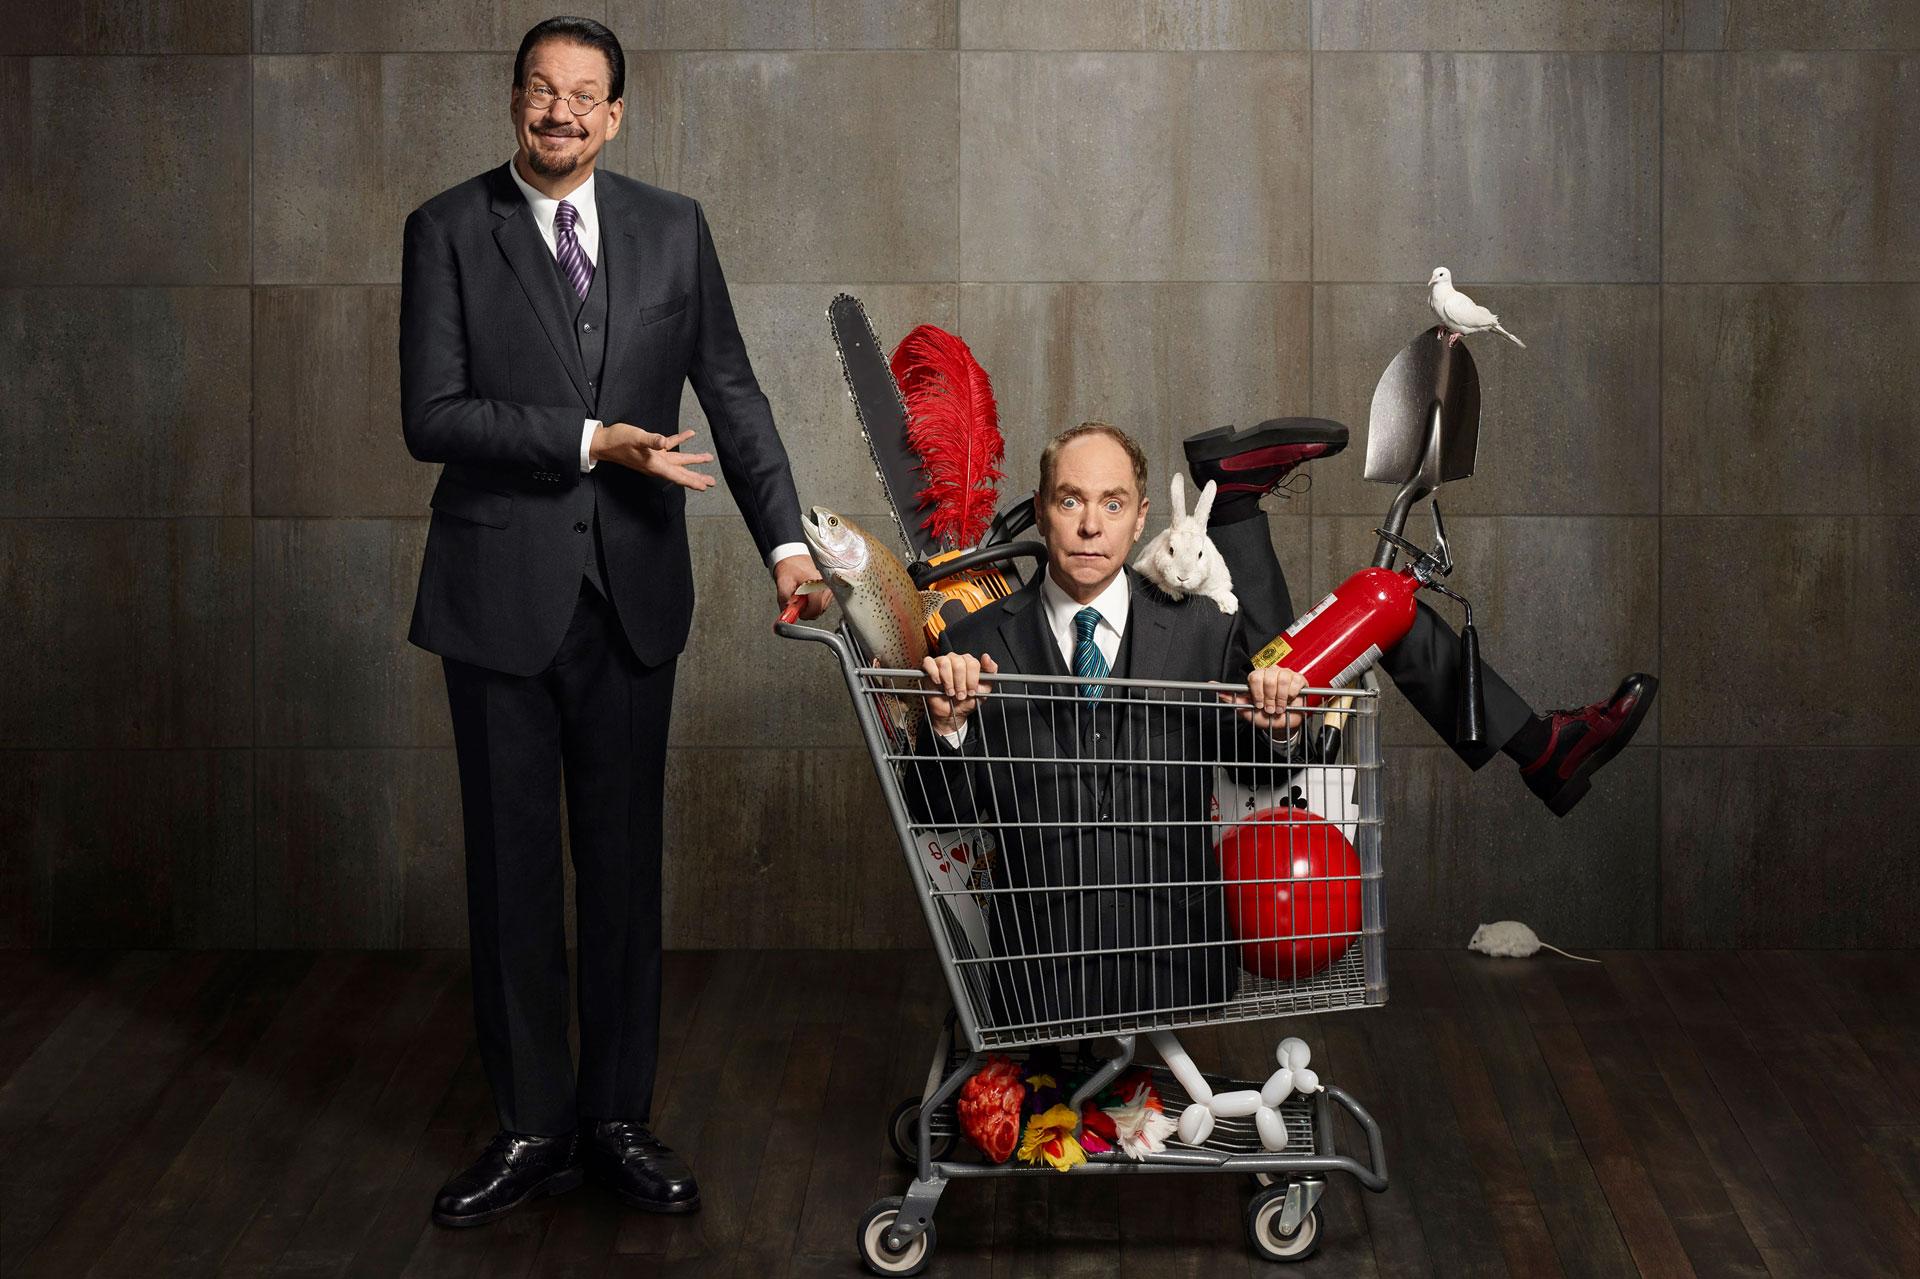 Penn and Teller image Shoppingcart 2016 HD wallpaper and background